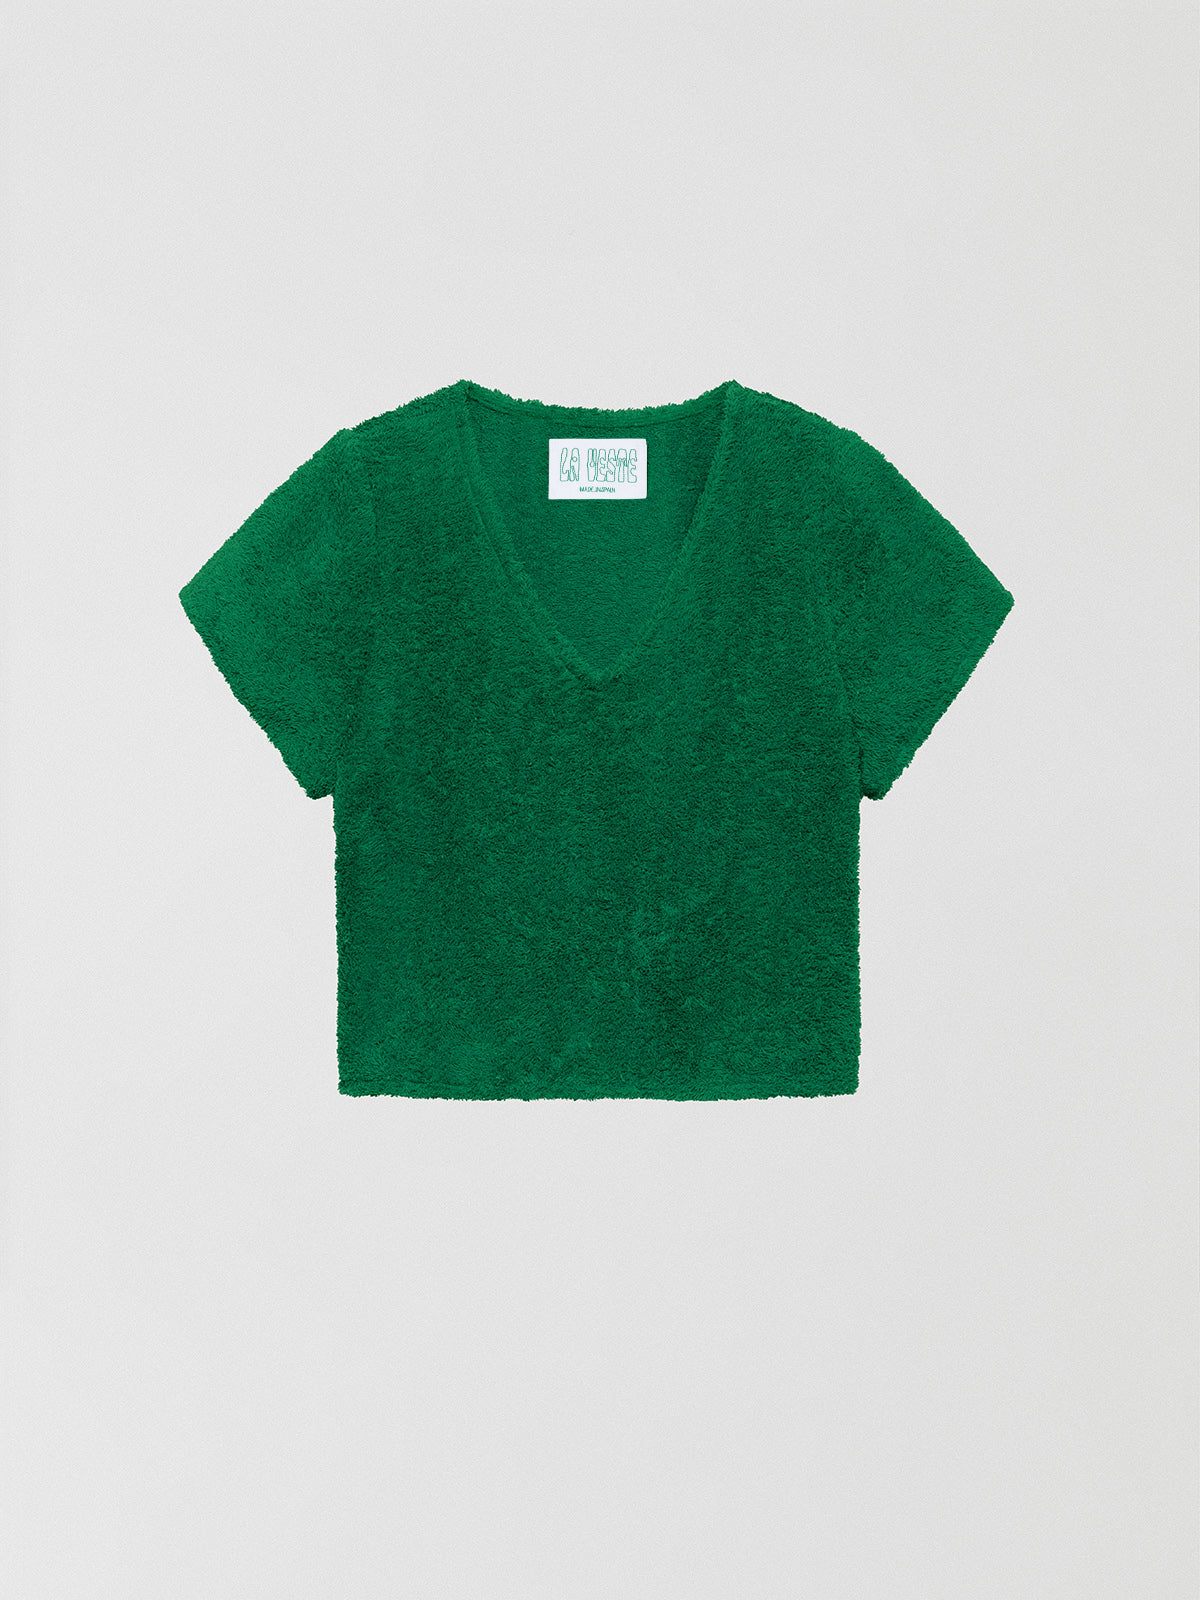 Towel Shirt Green is a dark green short sleeve shirt with v-neck and made of towel cotton fabric.